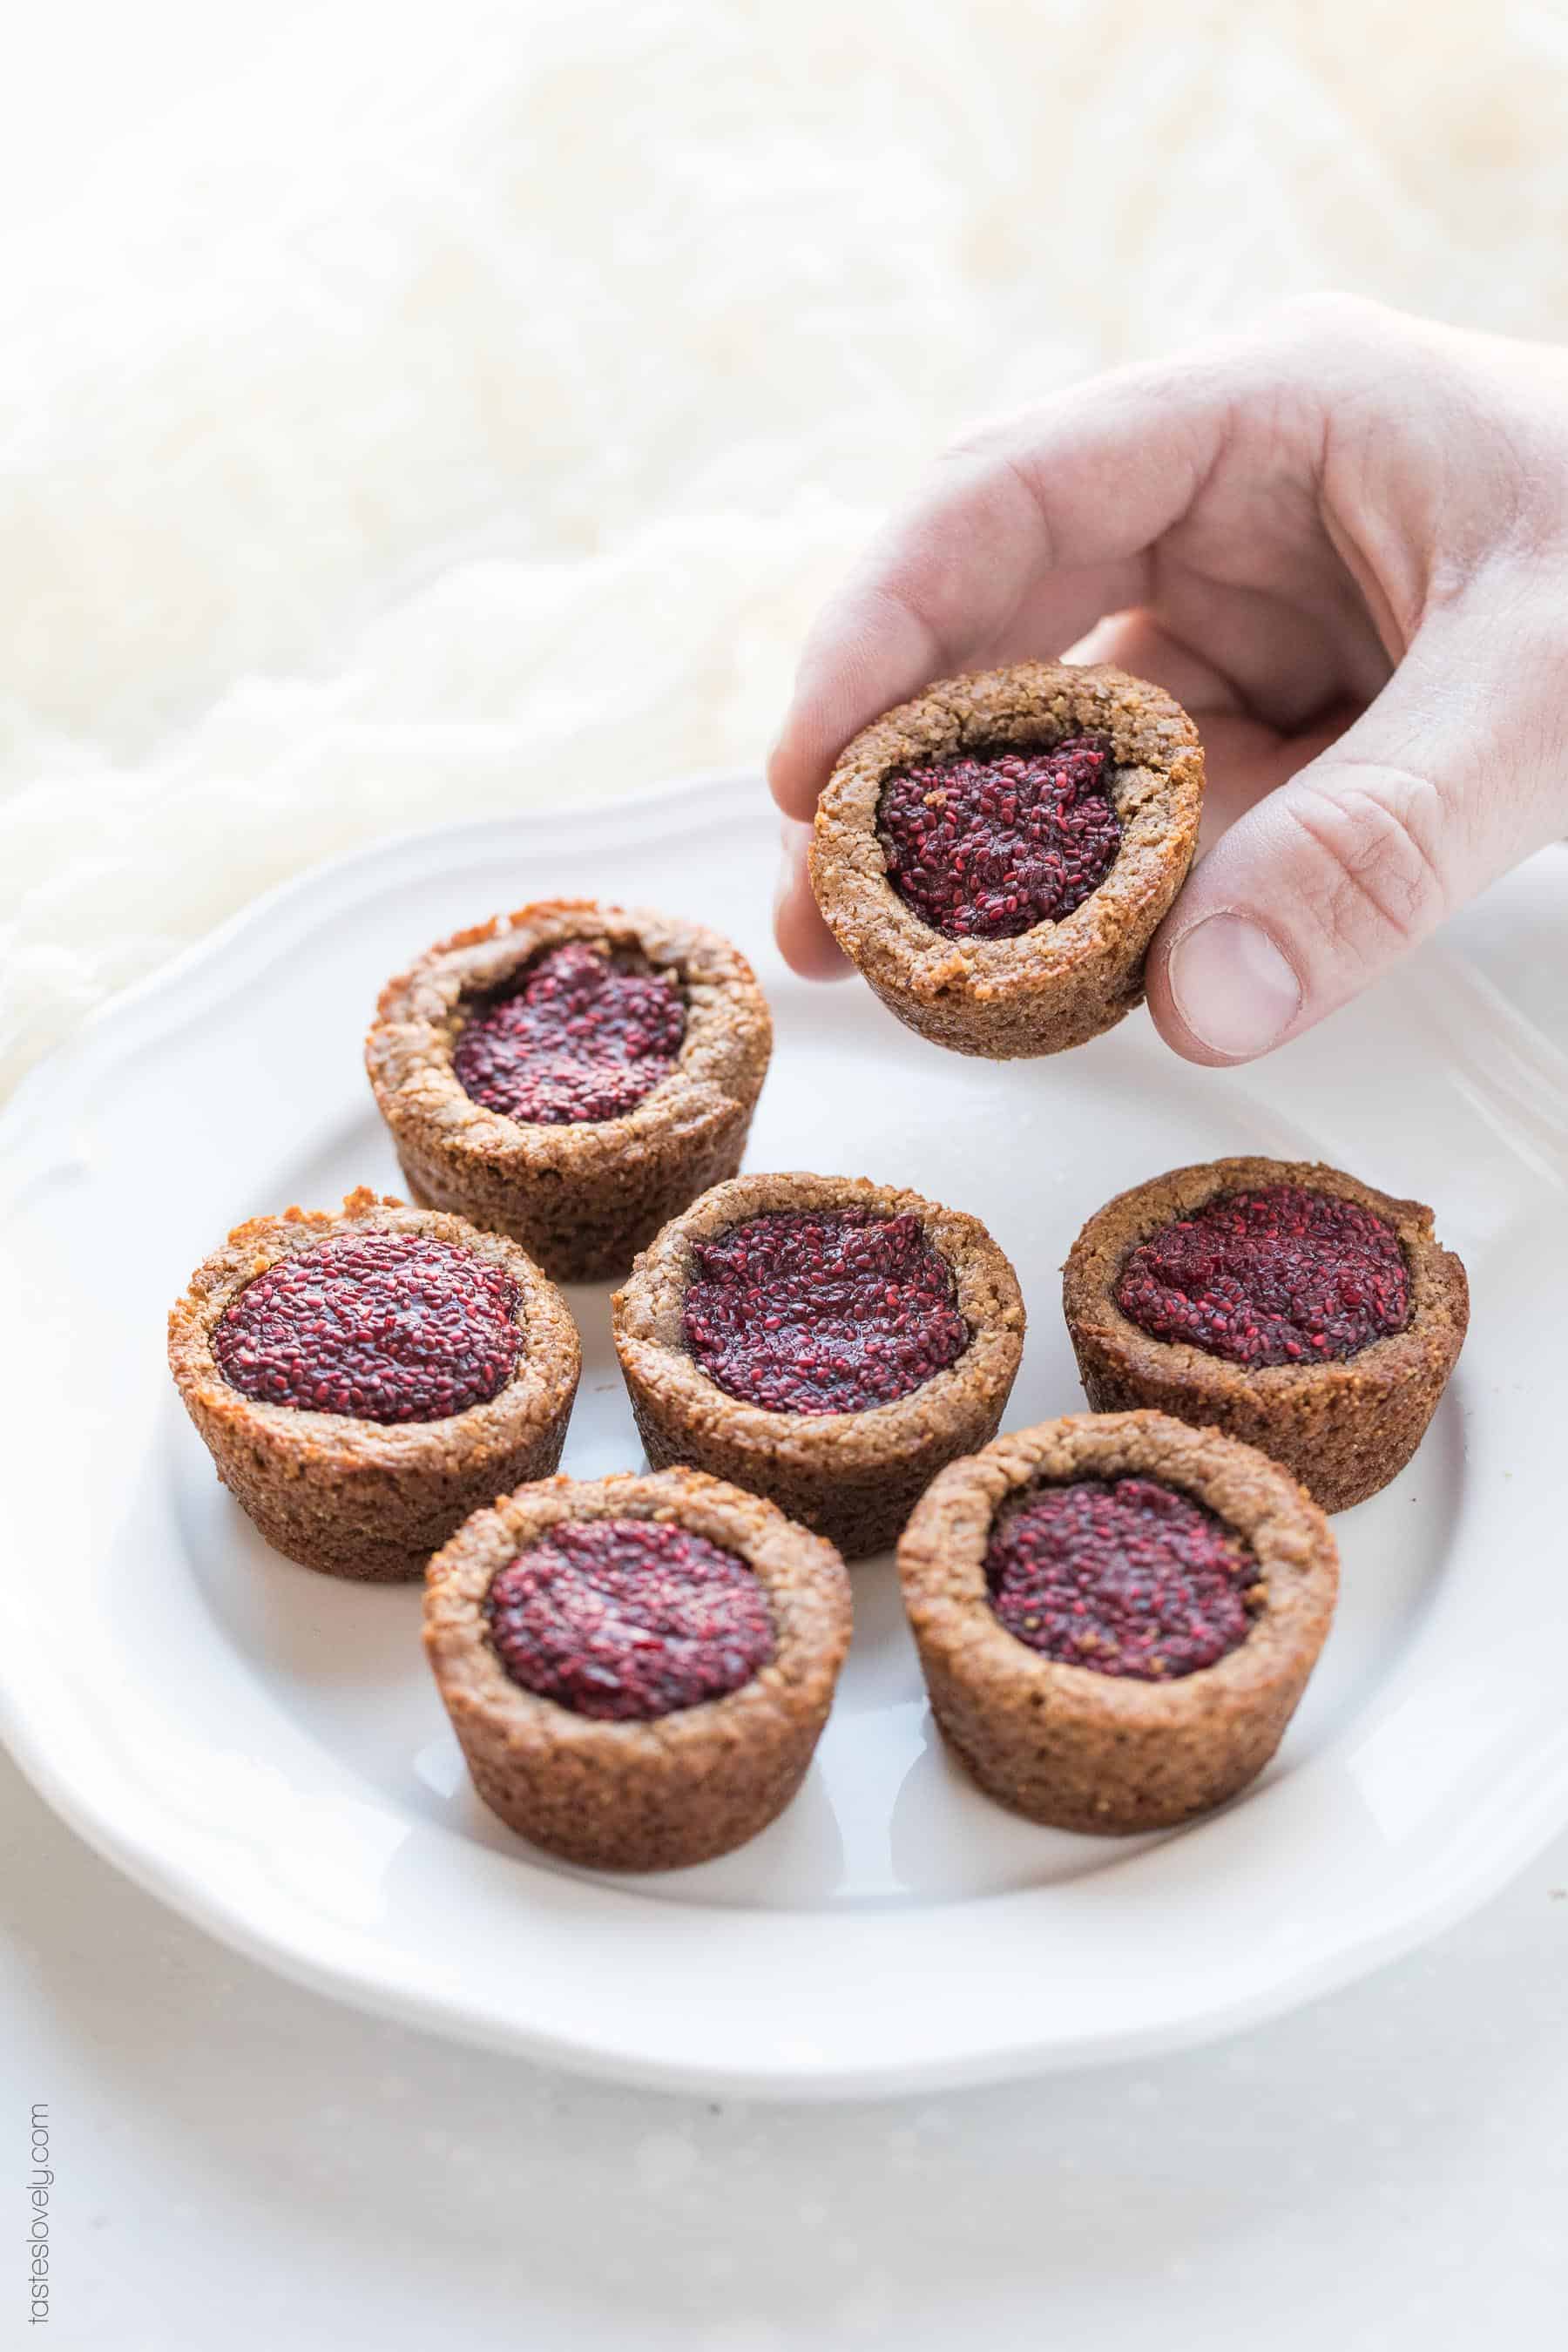 Paleo Almond Butter and Chia Jam Cookie Cups - a gluten free, dairy free and refined sugar free cookie recipe